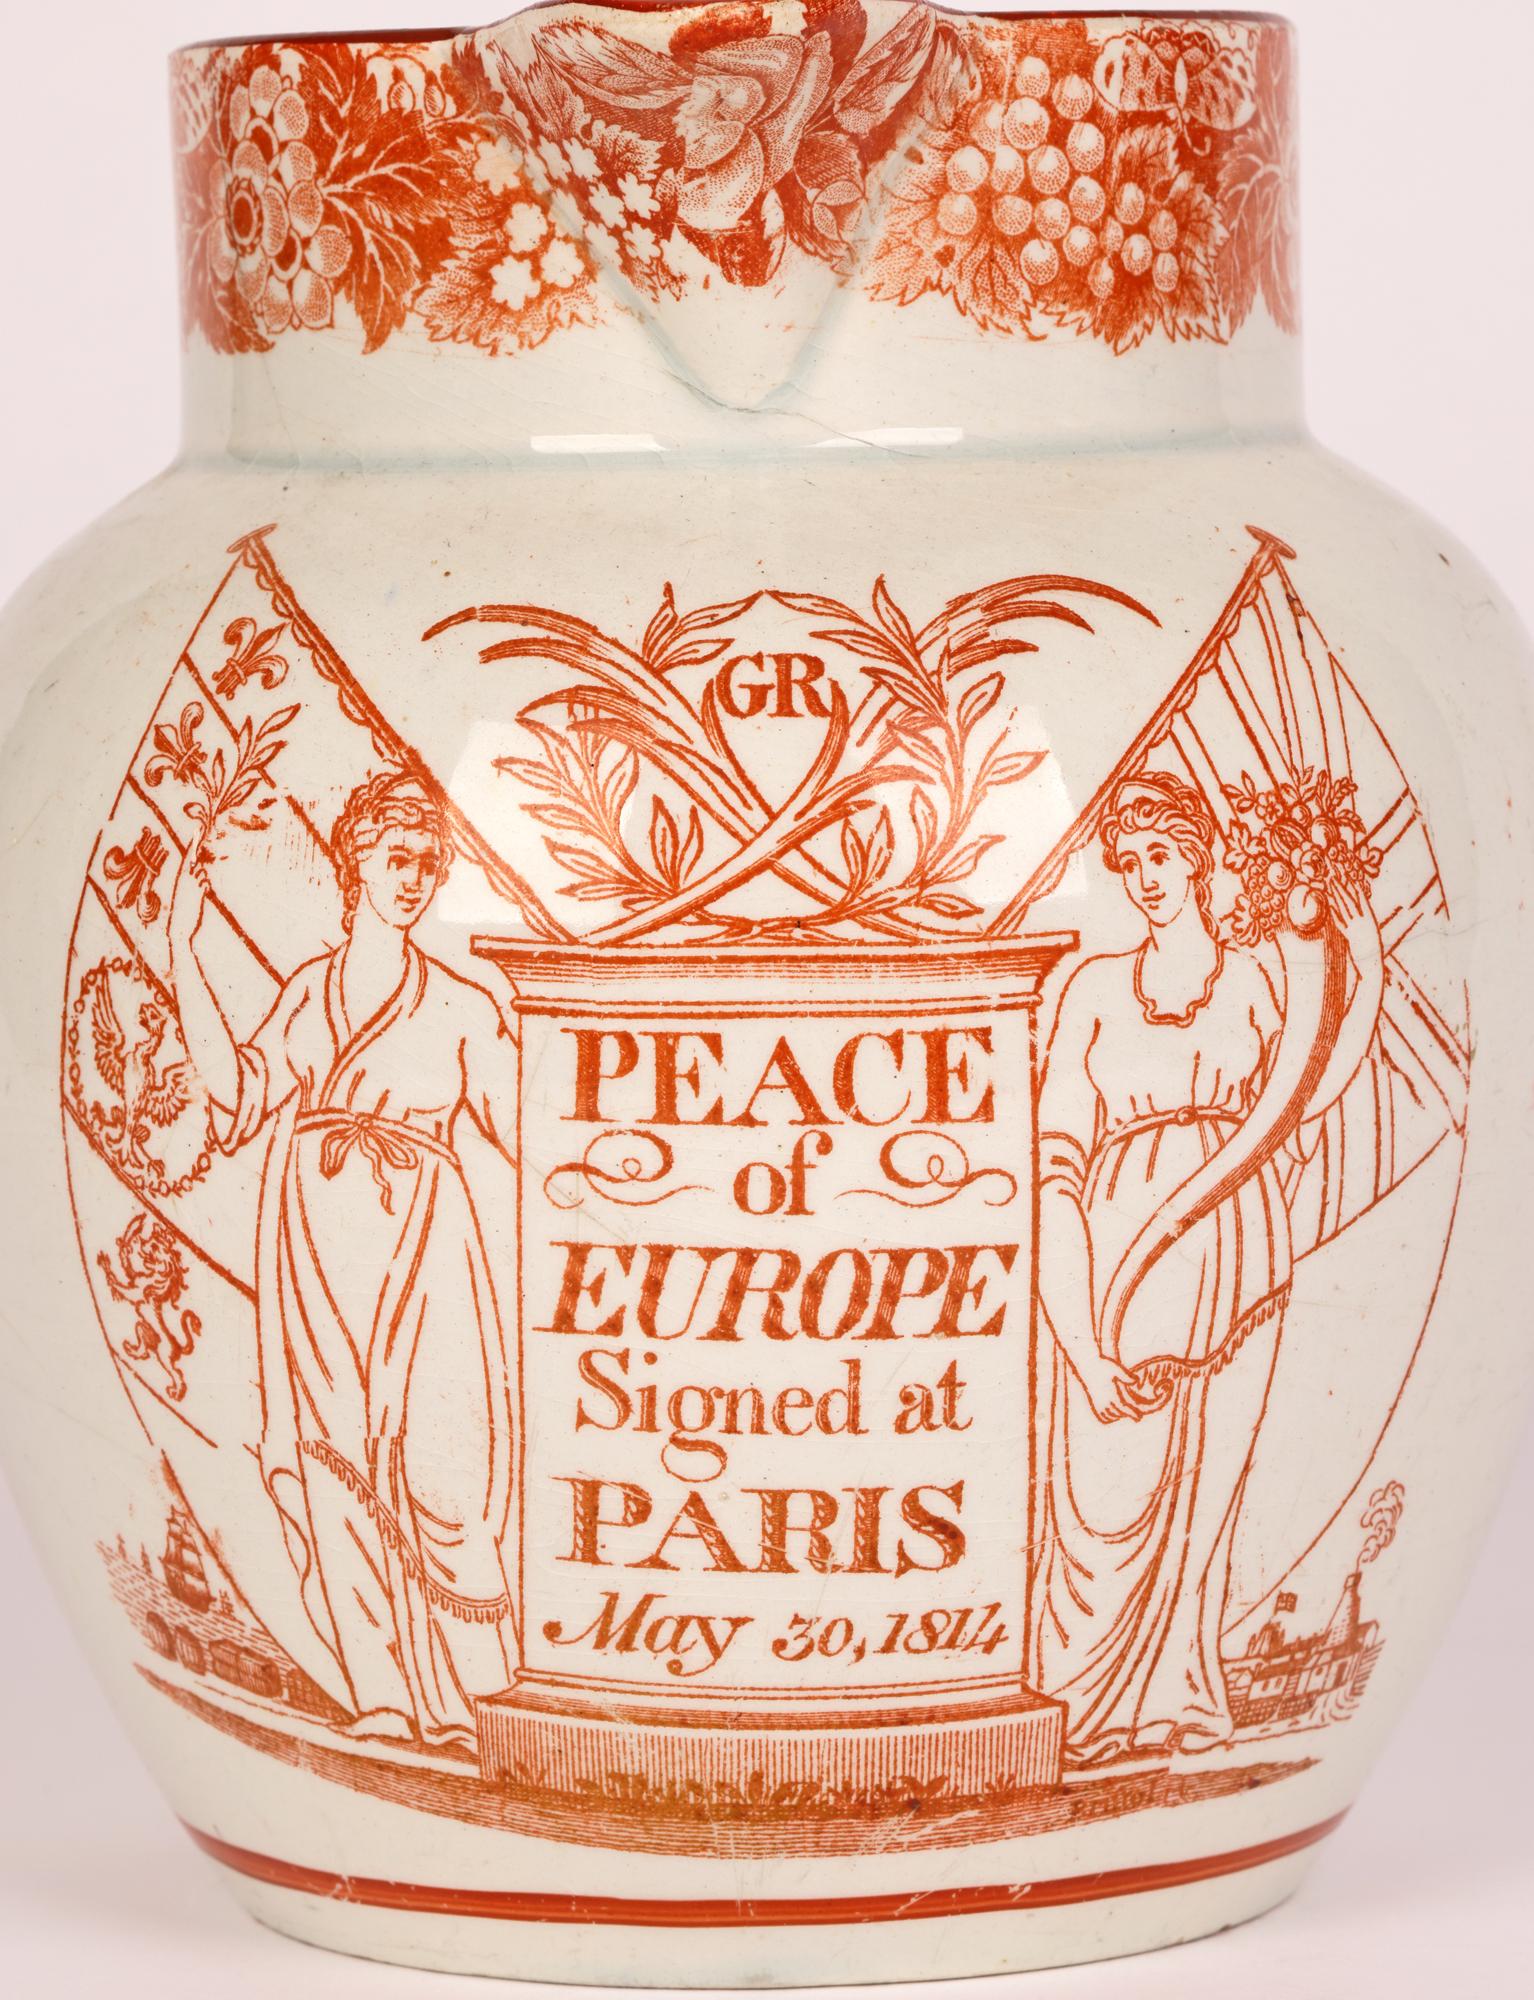 A rare Georgian pearlware pottery jug commemorating the Treaty of Paris on 30th May, 1814. 

The Treaty of Paris ended the Napoleonic wars between France and Great Britain, Russia, Austria and Prussia and followed the abdication of Napoleon as